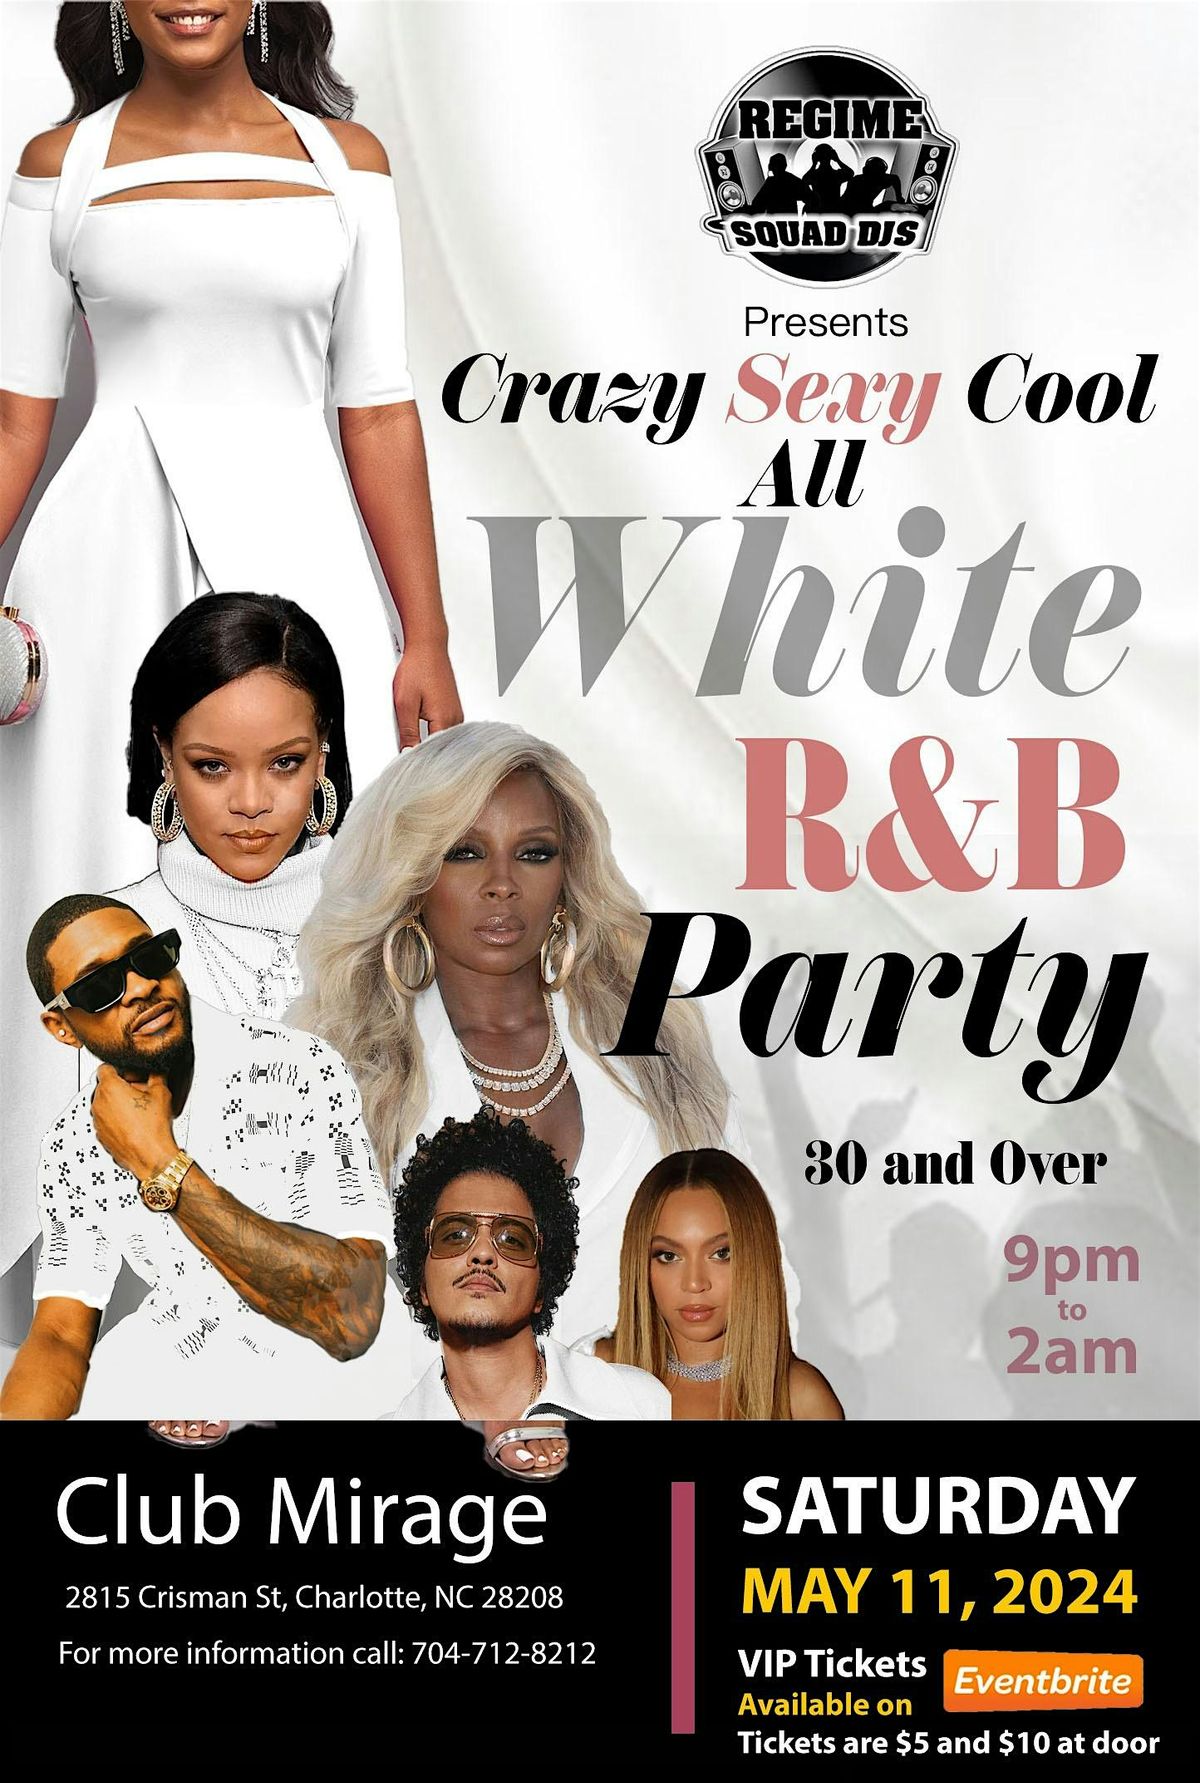 Crazy Sexy Cool All White R&B Party